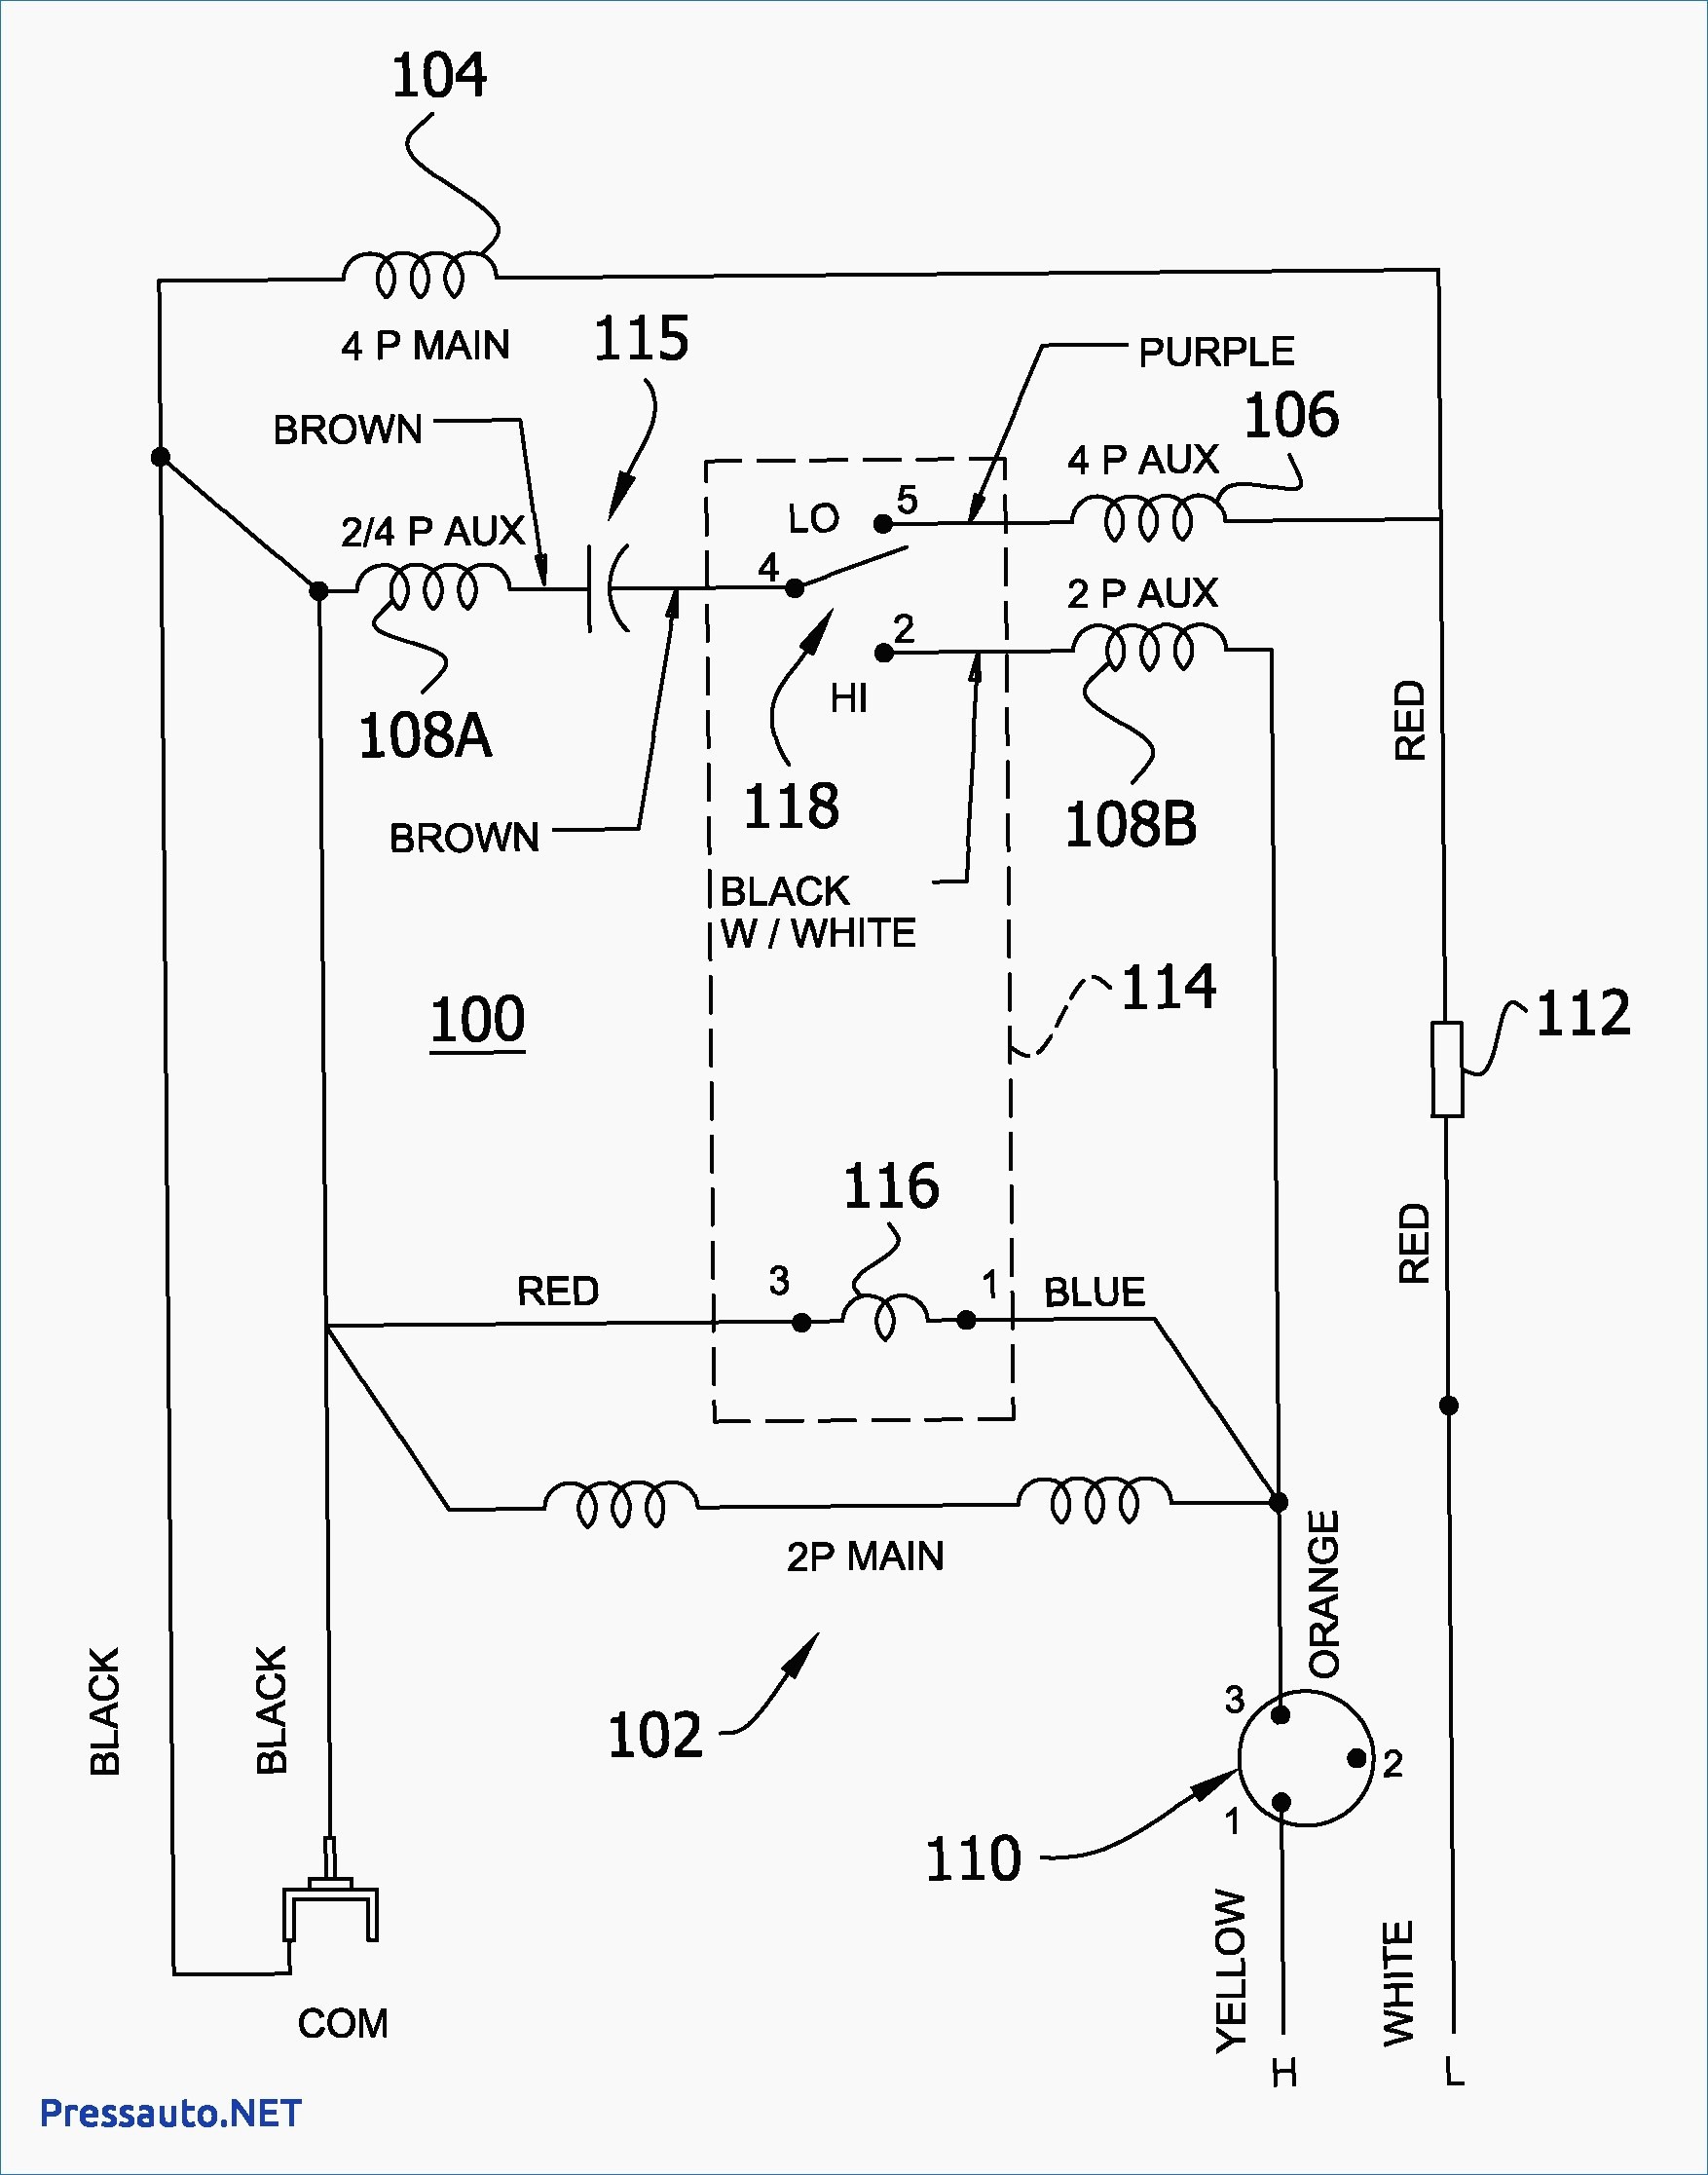 Single Phase Motor Wiring Diagram with Capacitor Start Roc Grp org